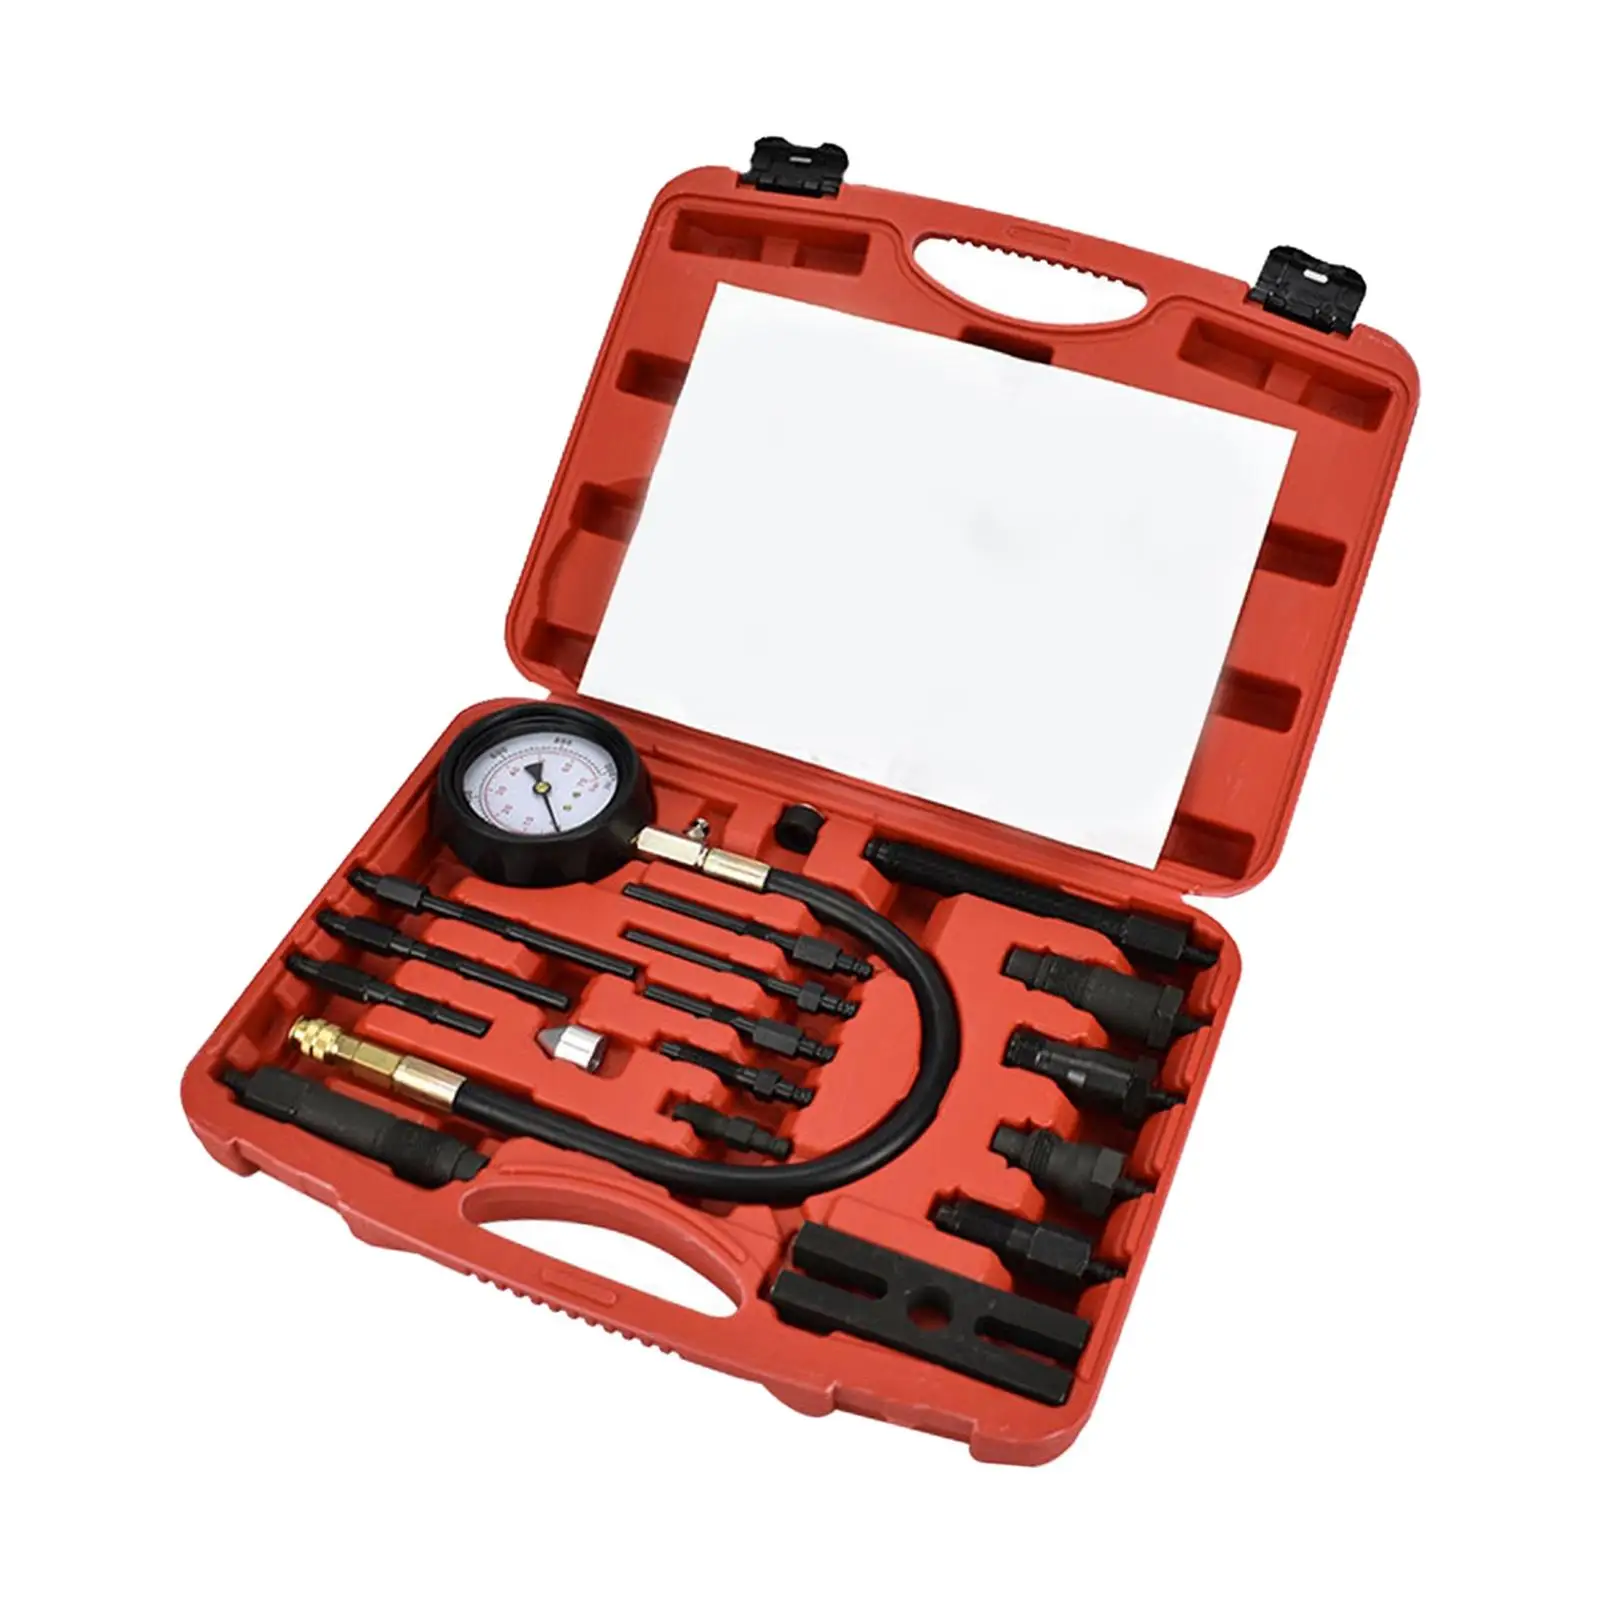 Set of 17 Diesel Engine Cylinder Compression Tester Tool, Quick Release Push Button Valve Accessories Widely Application Kit Set